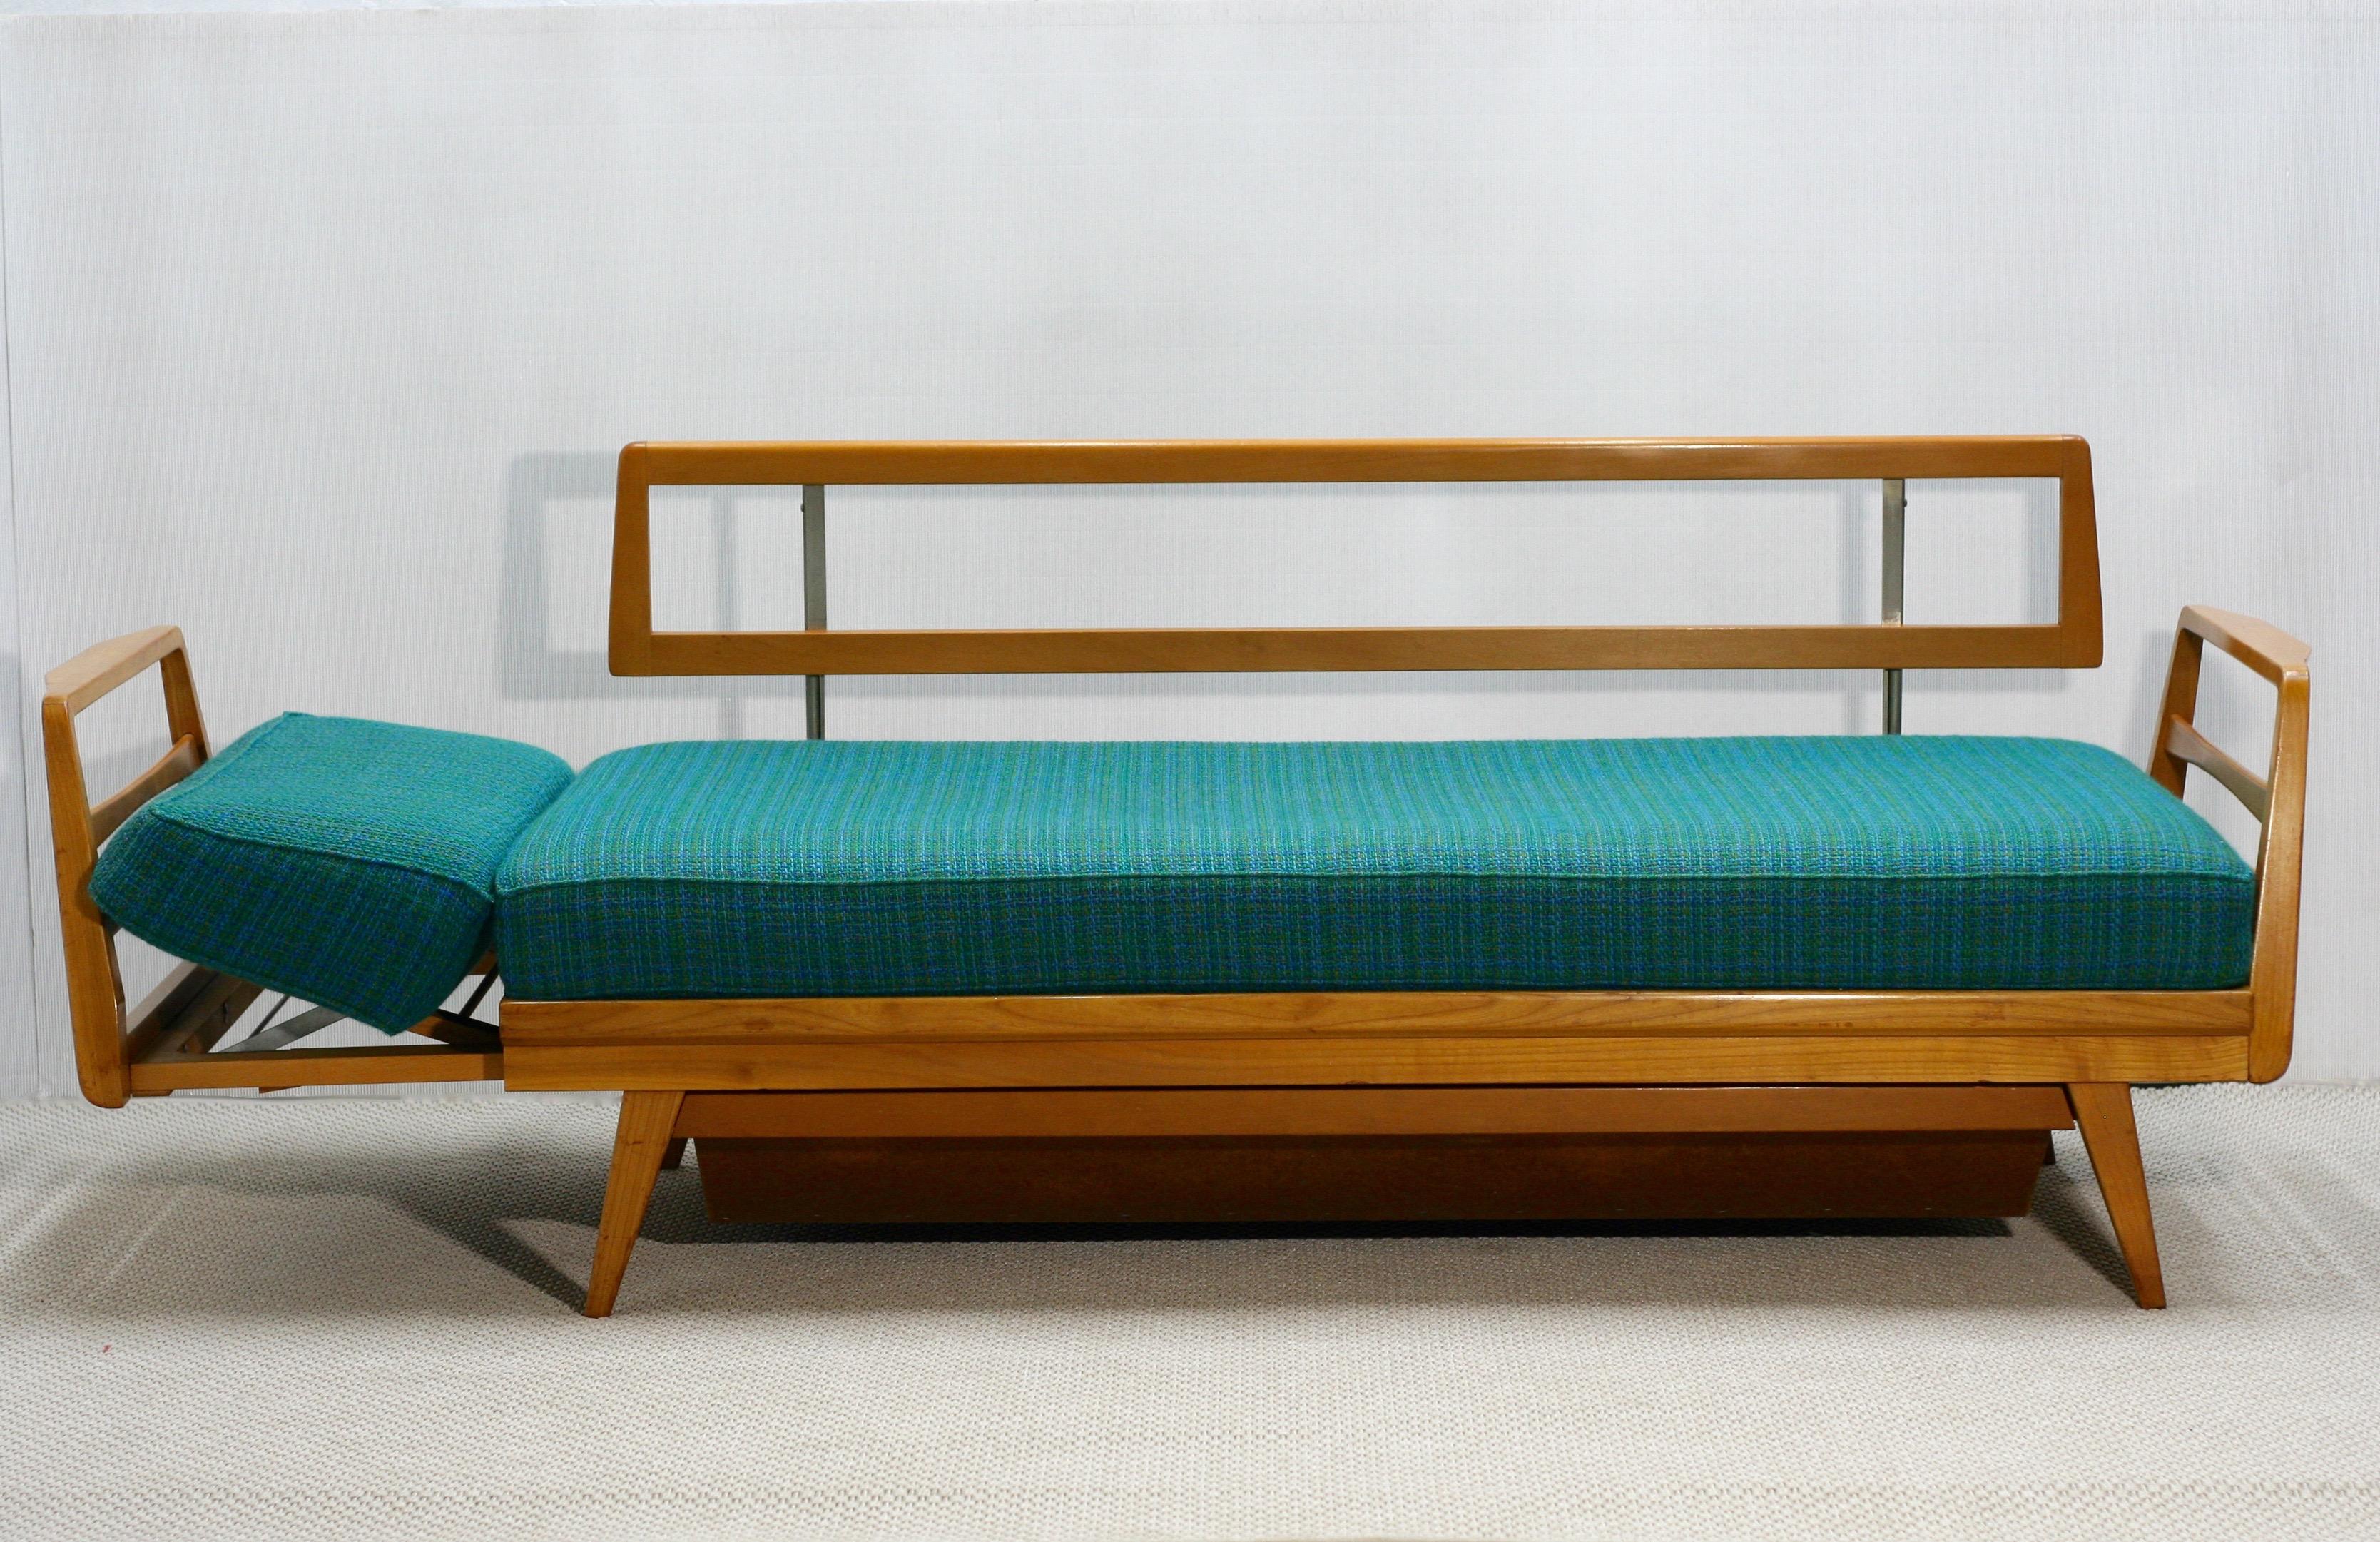 Mid-Century Modern MidCentury German Extendable Beech Wood Daybed Sofa from Knoll Antimott, 1950s For Sale